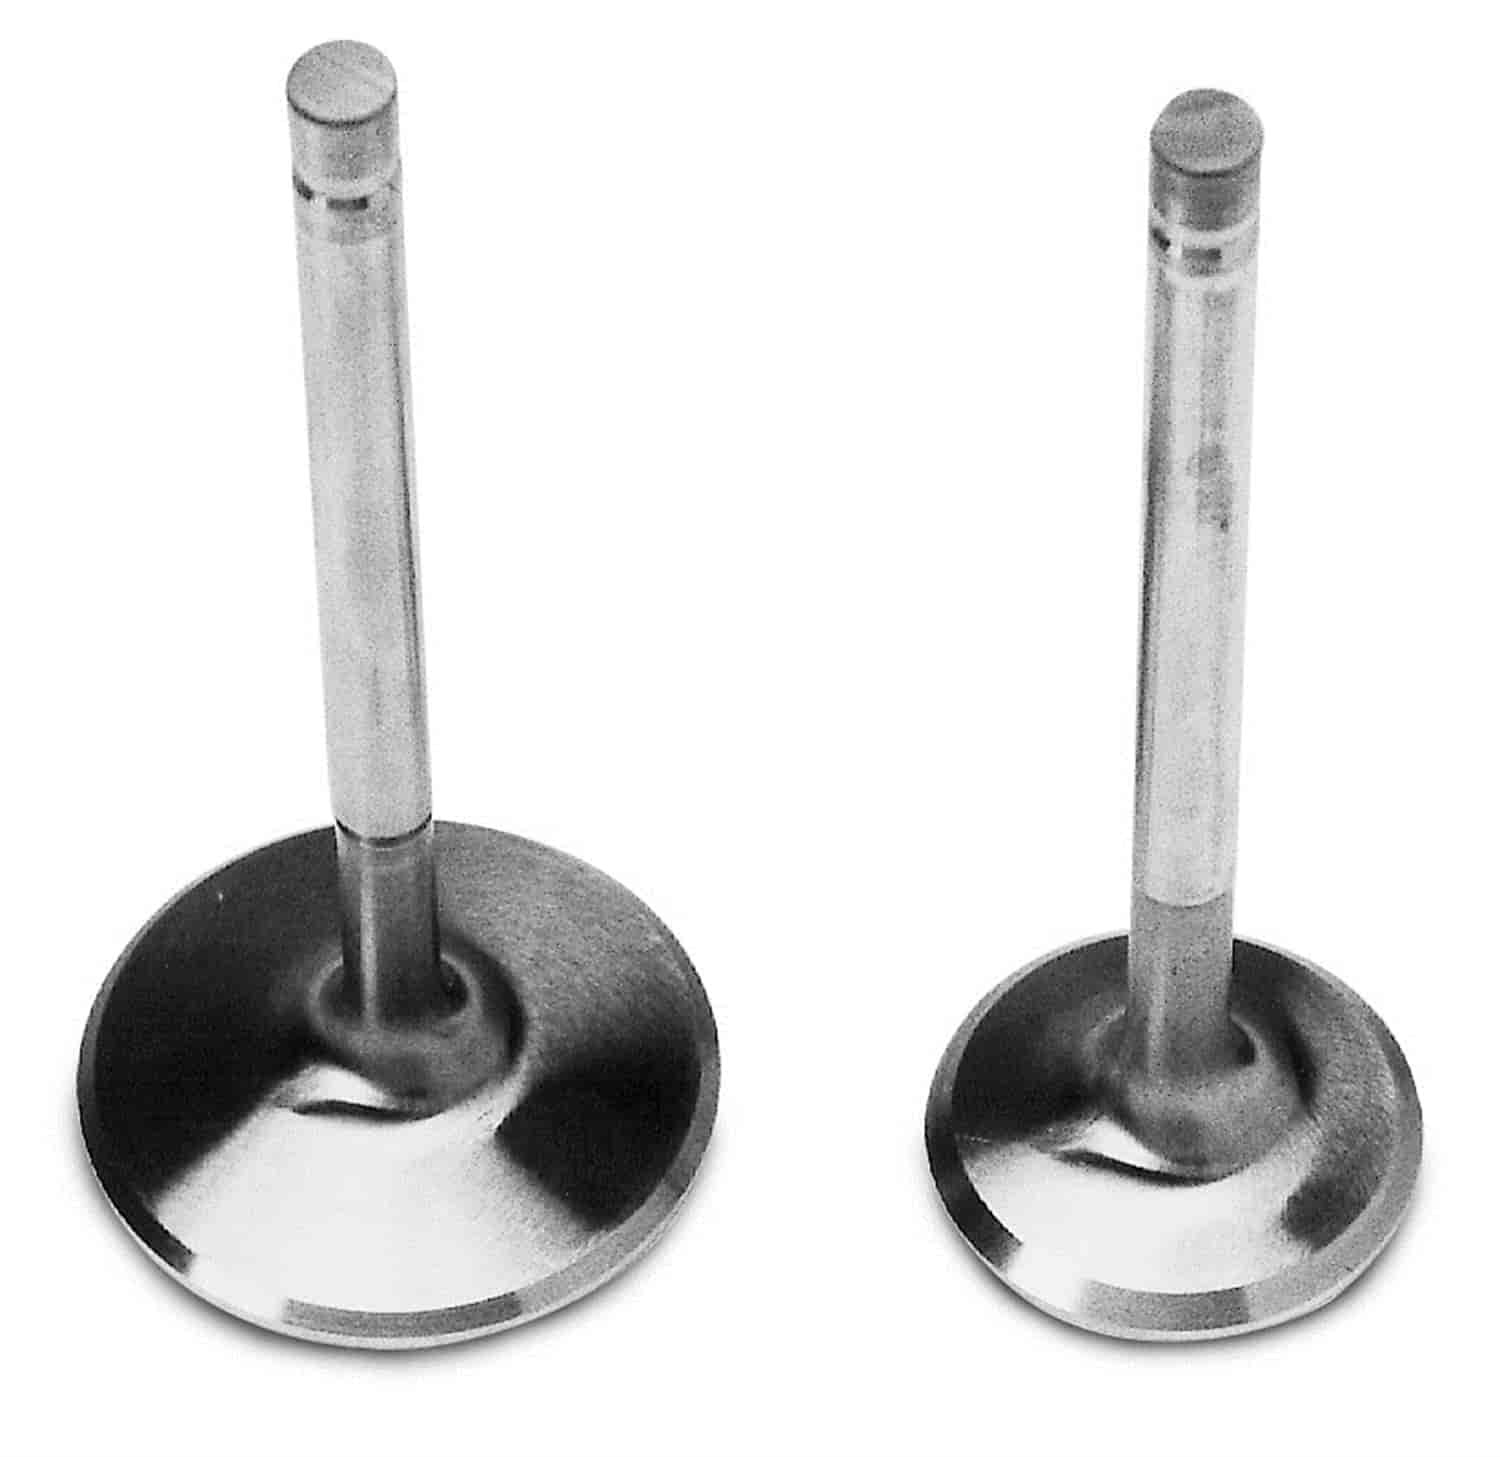 Single Exhaust Valve 1.88" for Big Block Chevy Performer RPM Heads #350-60459, 350-60479, 350-60499, & 350-60559